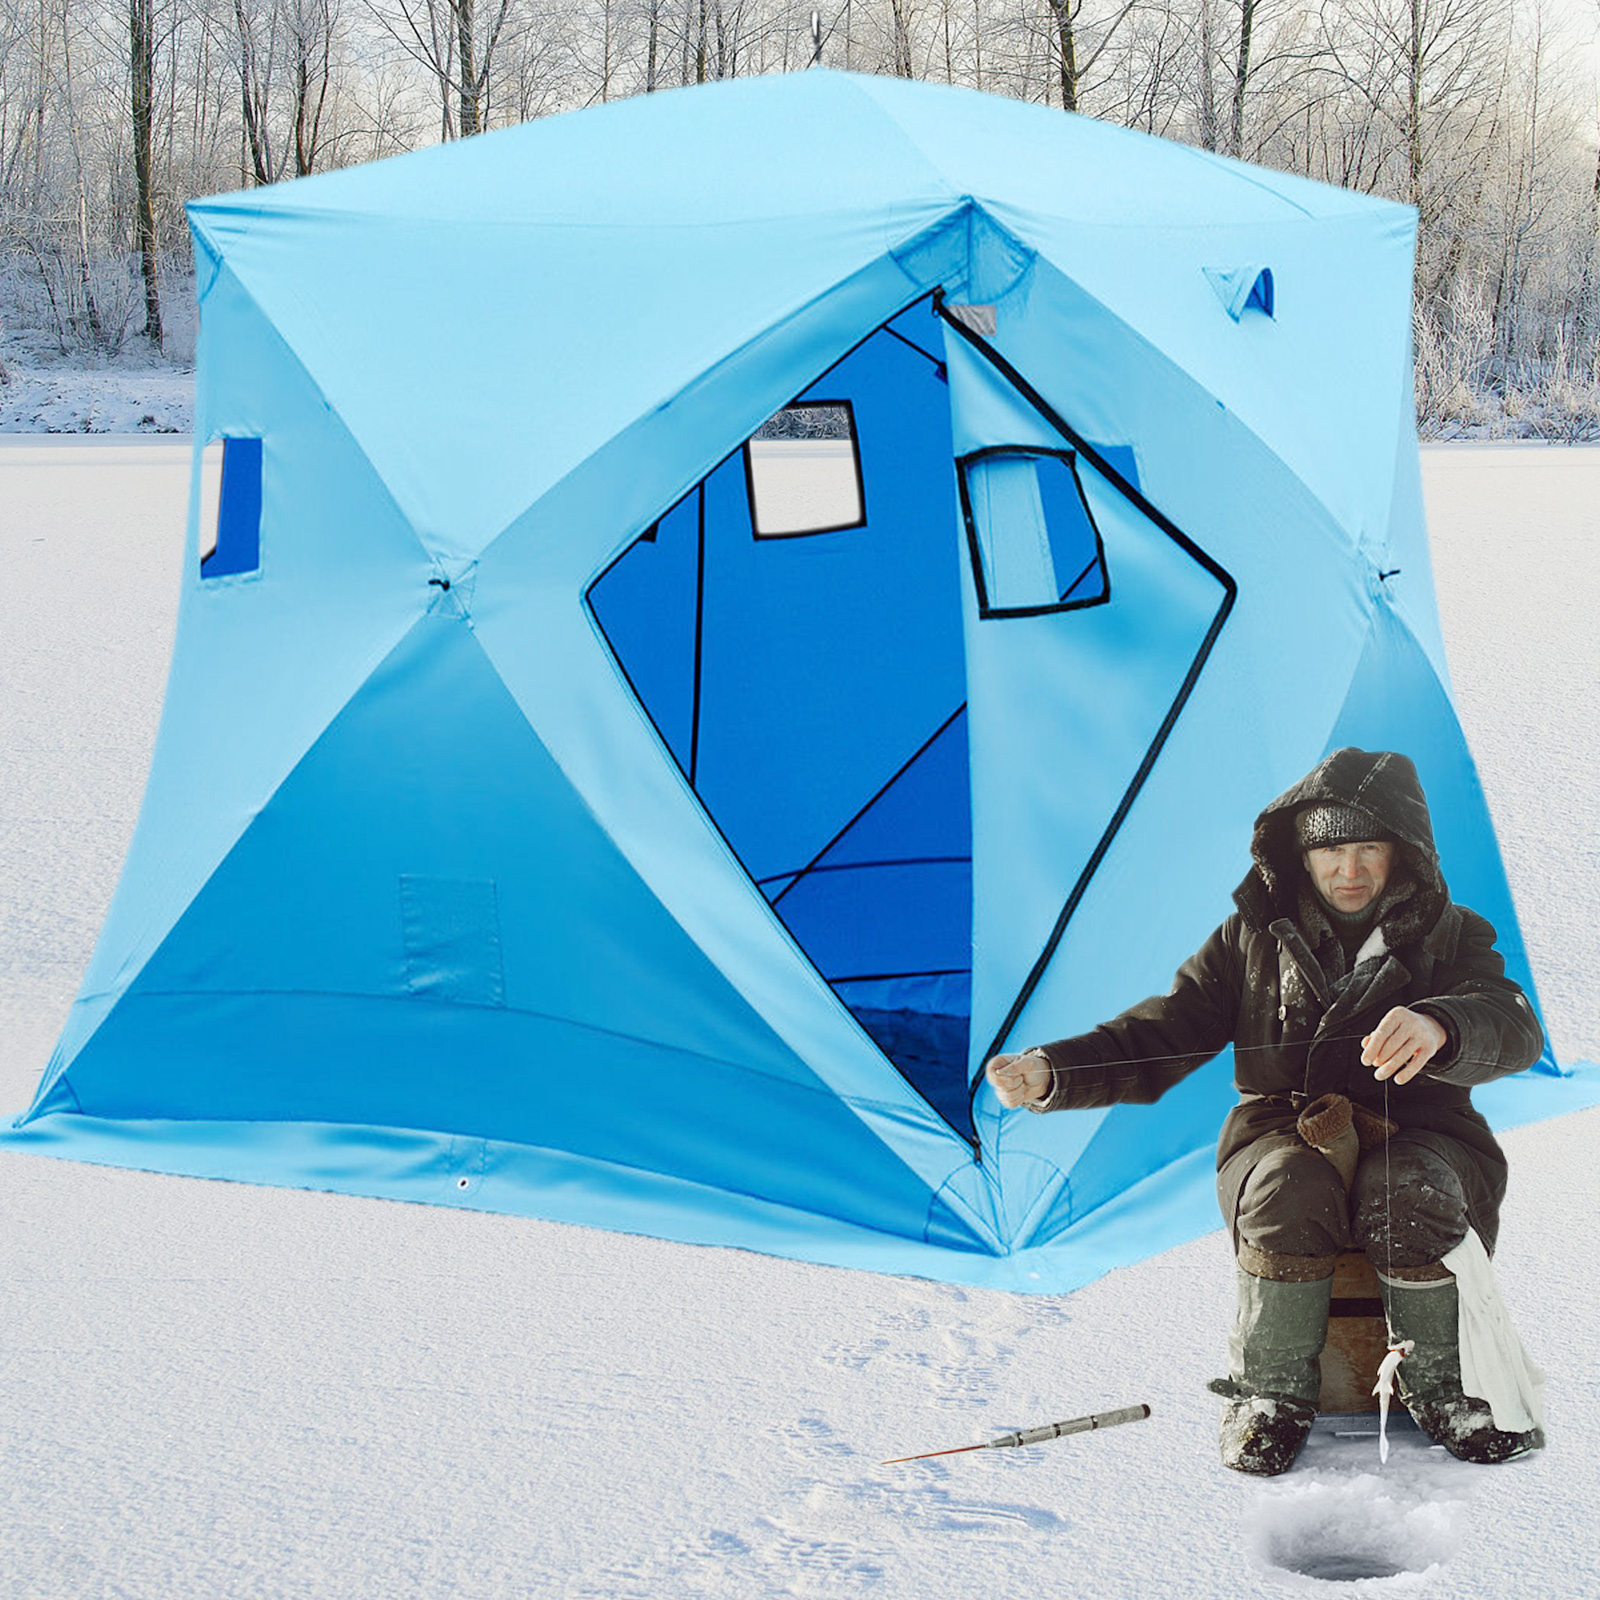 Ice Shelter Fishing Tent 4-person Waterproof Pop-up Shanty w Window Carrying Bag | eBay